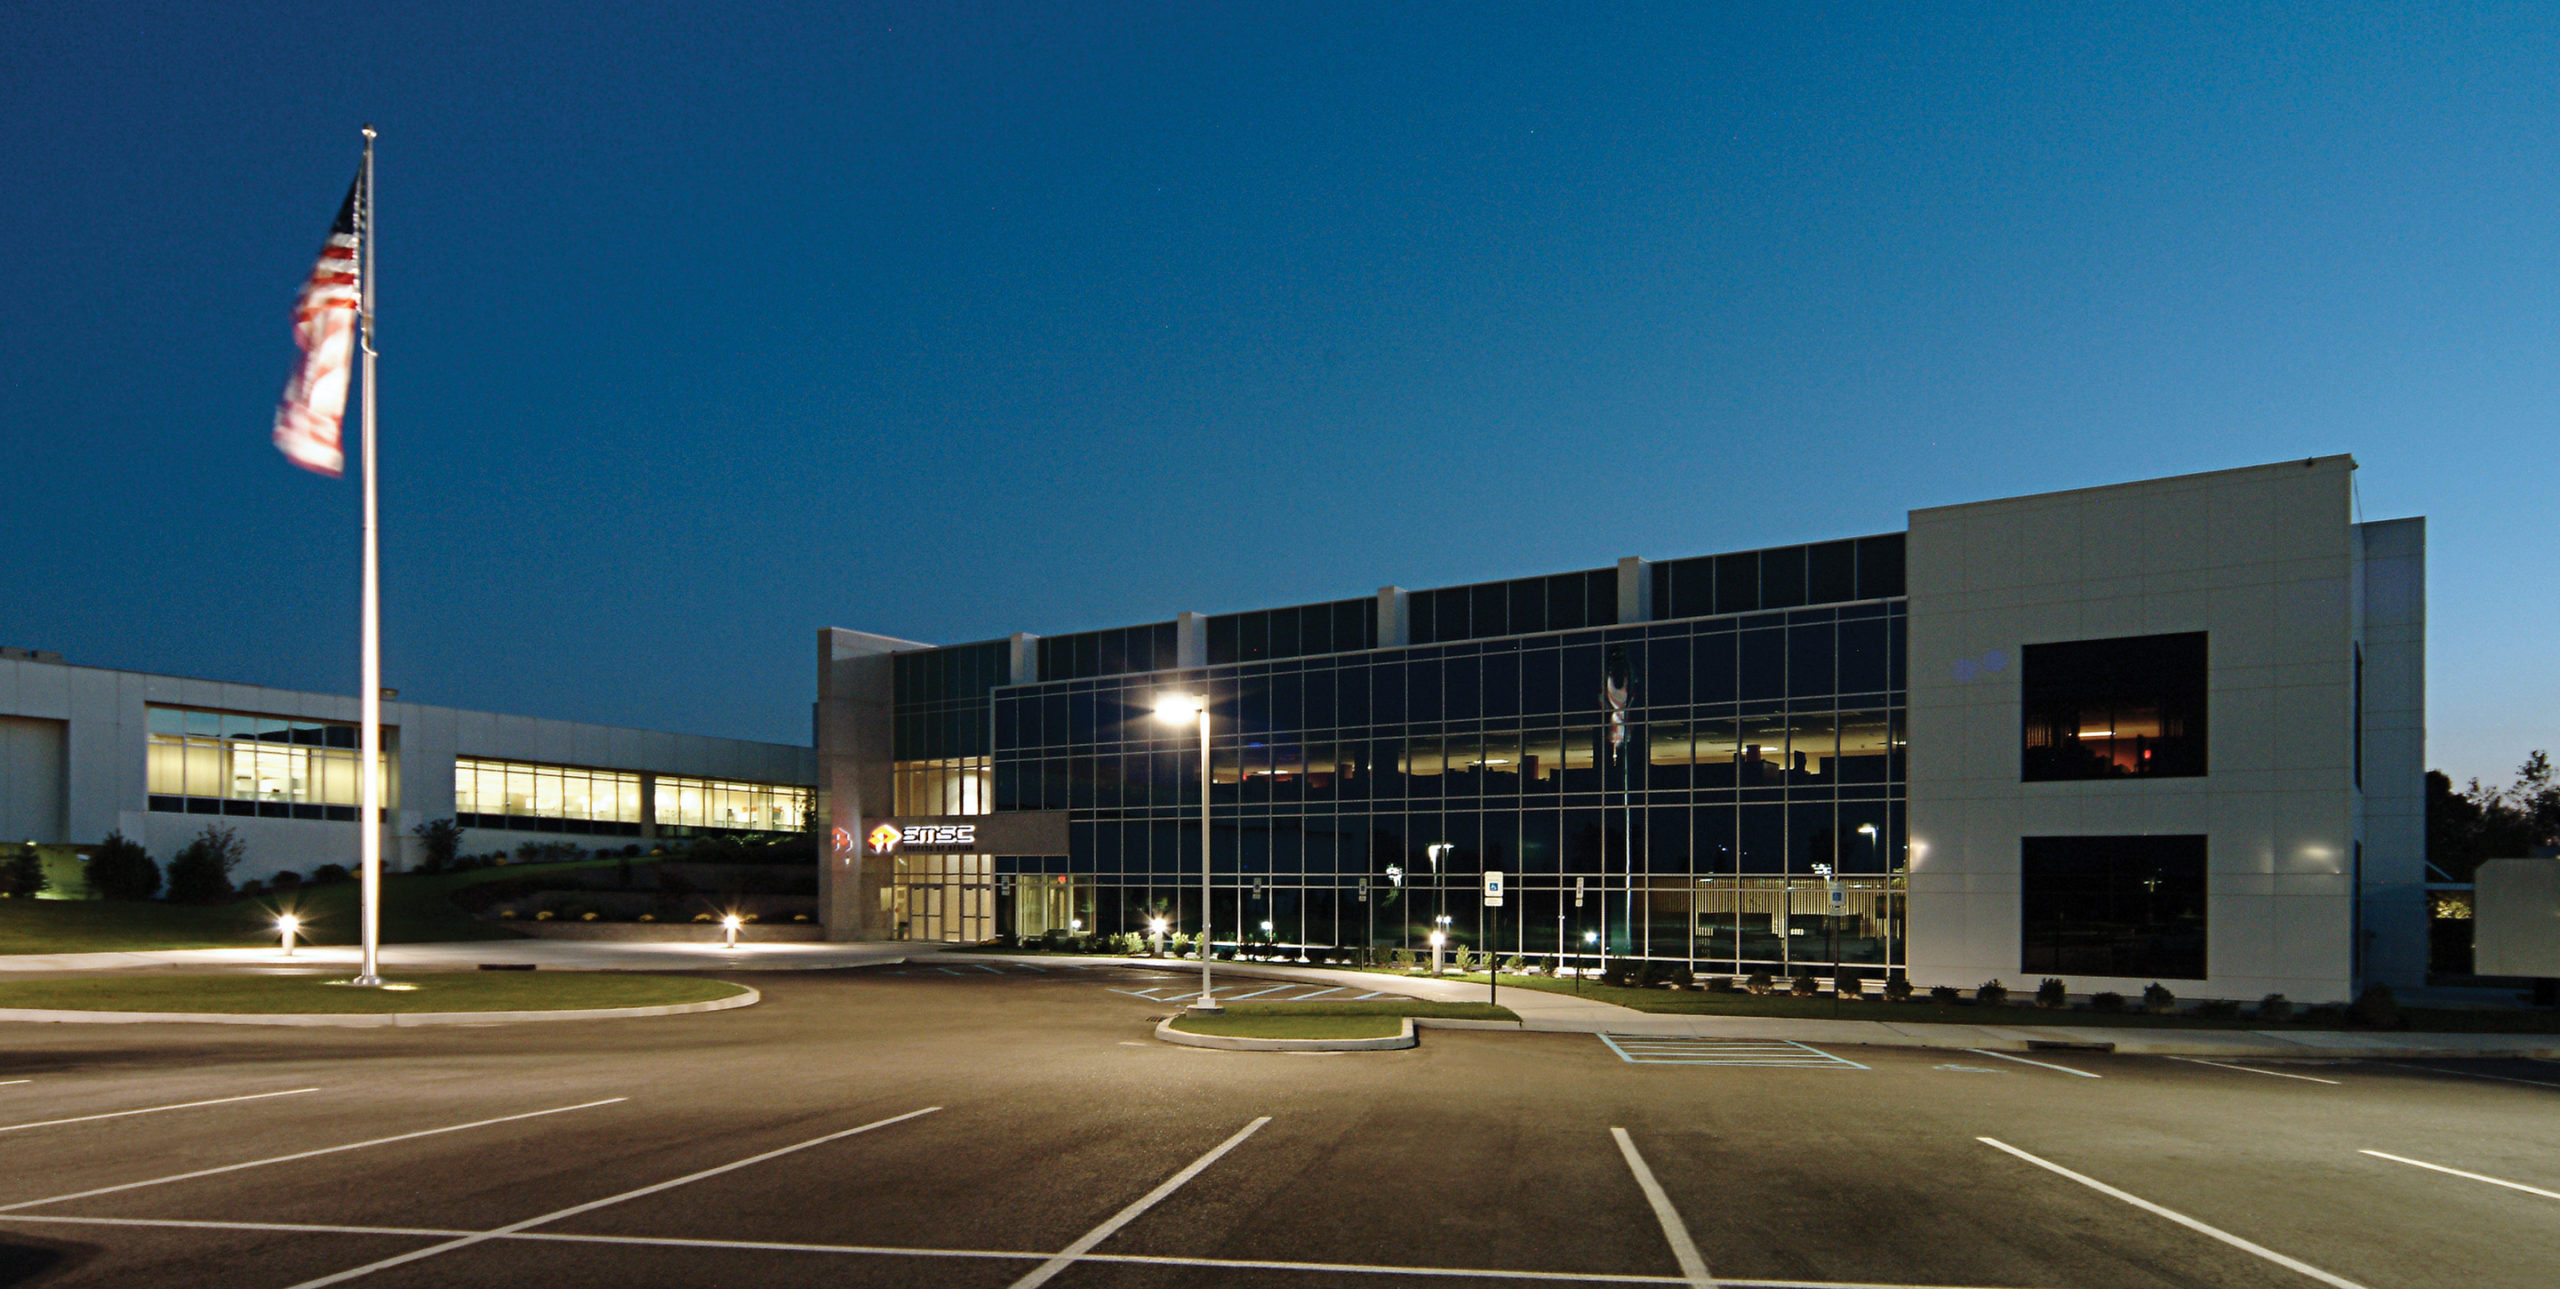 Back exterior of SMSC in Hauppauge